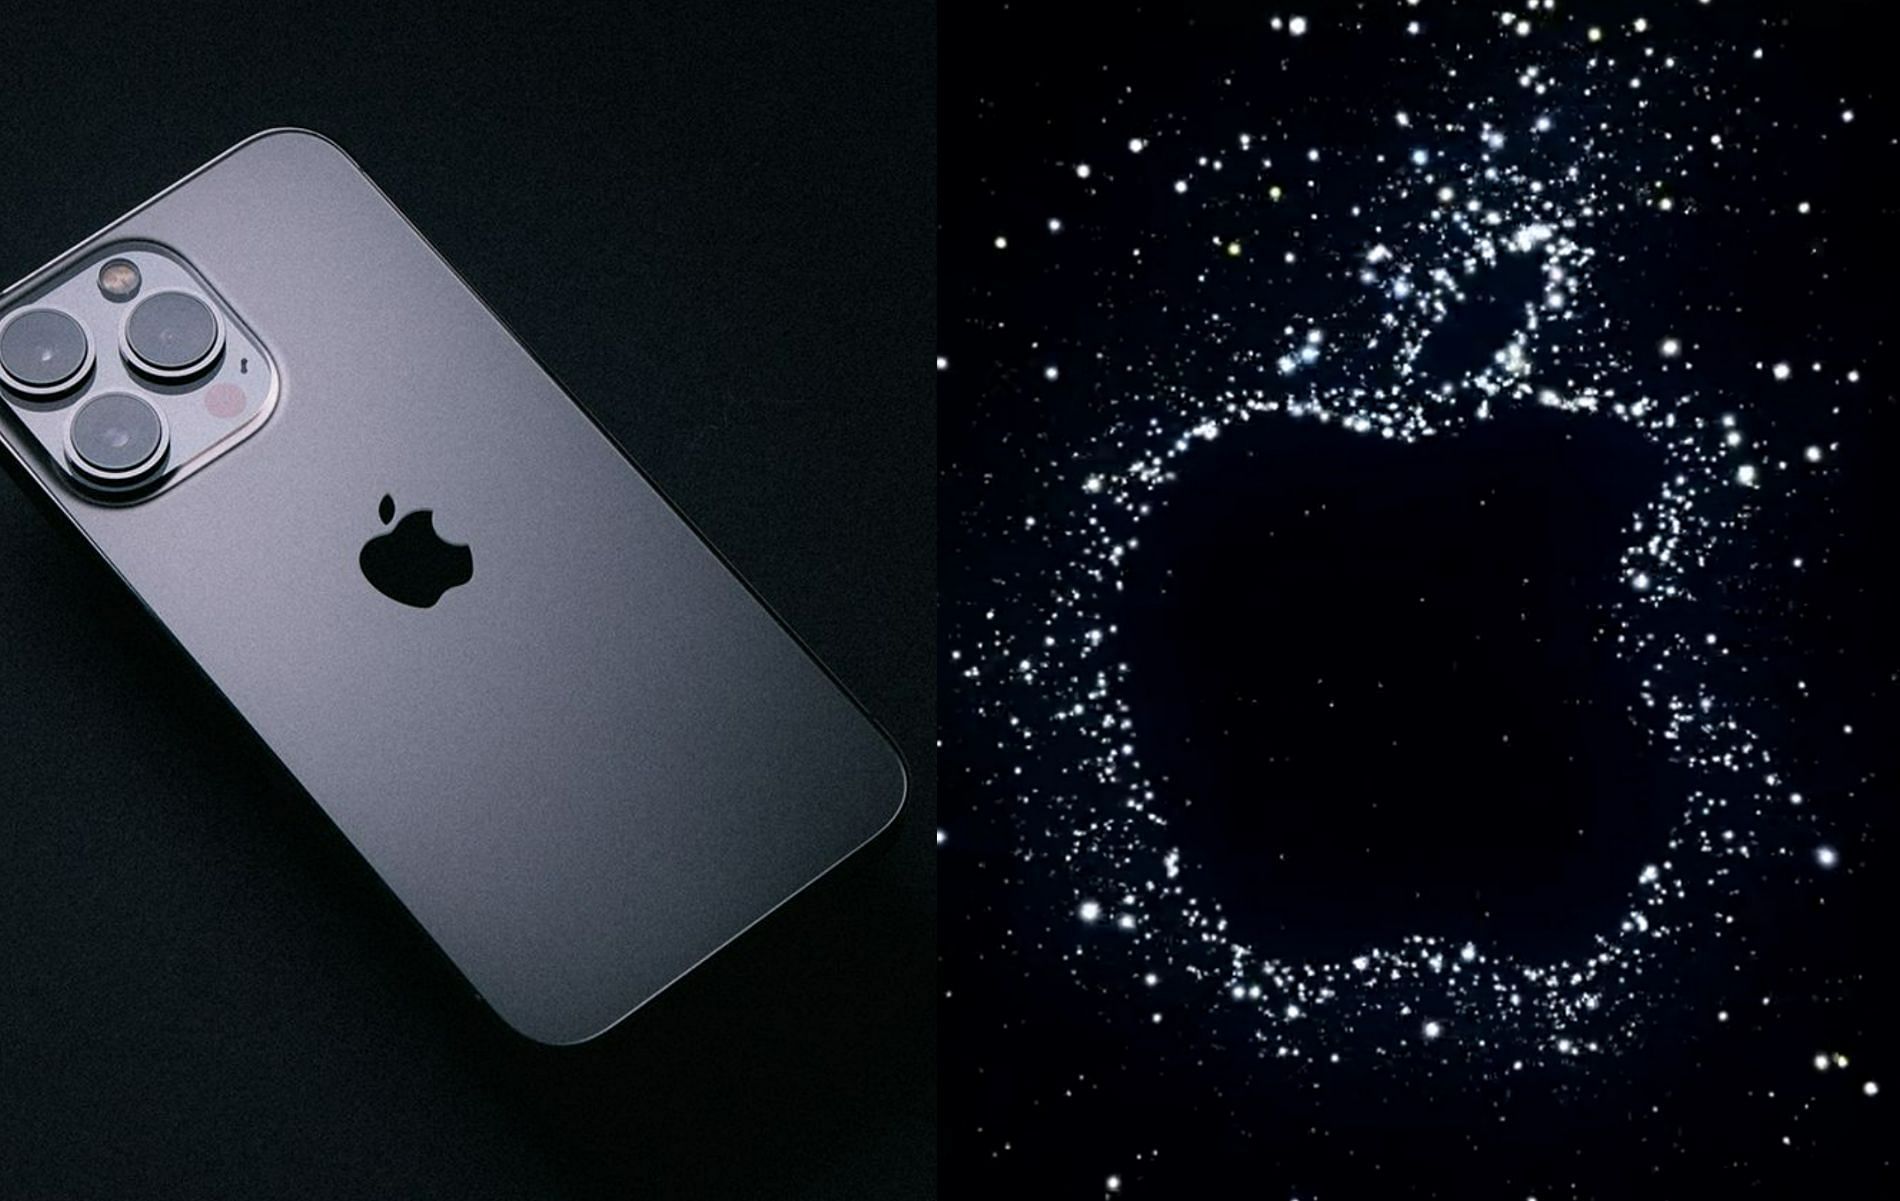 Sattelite Connectivity and Ultrawide Camera with large Pixels expected to be a key feature of the iPhone 14  (Images via Apple)